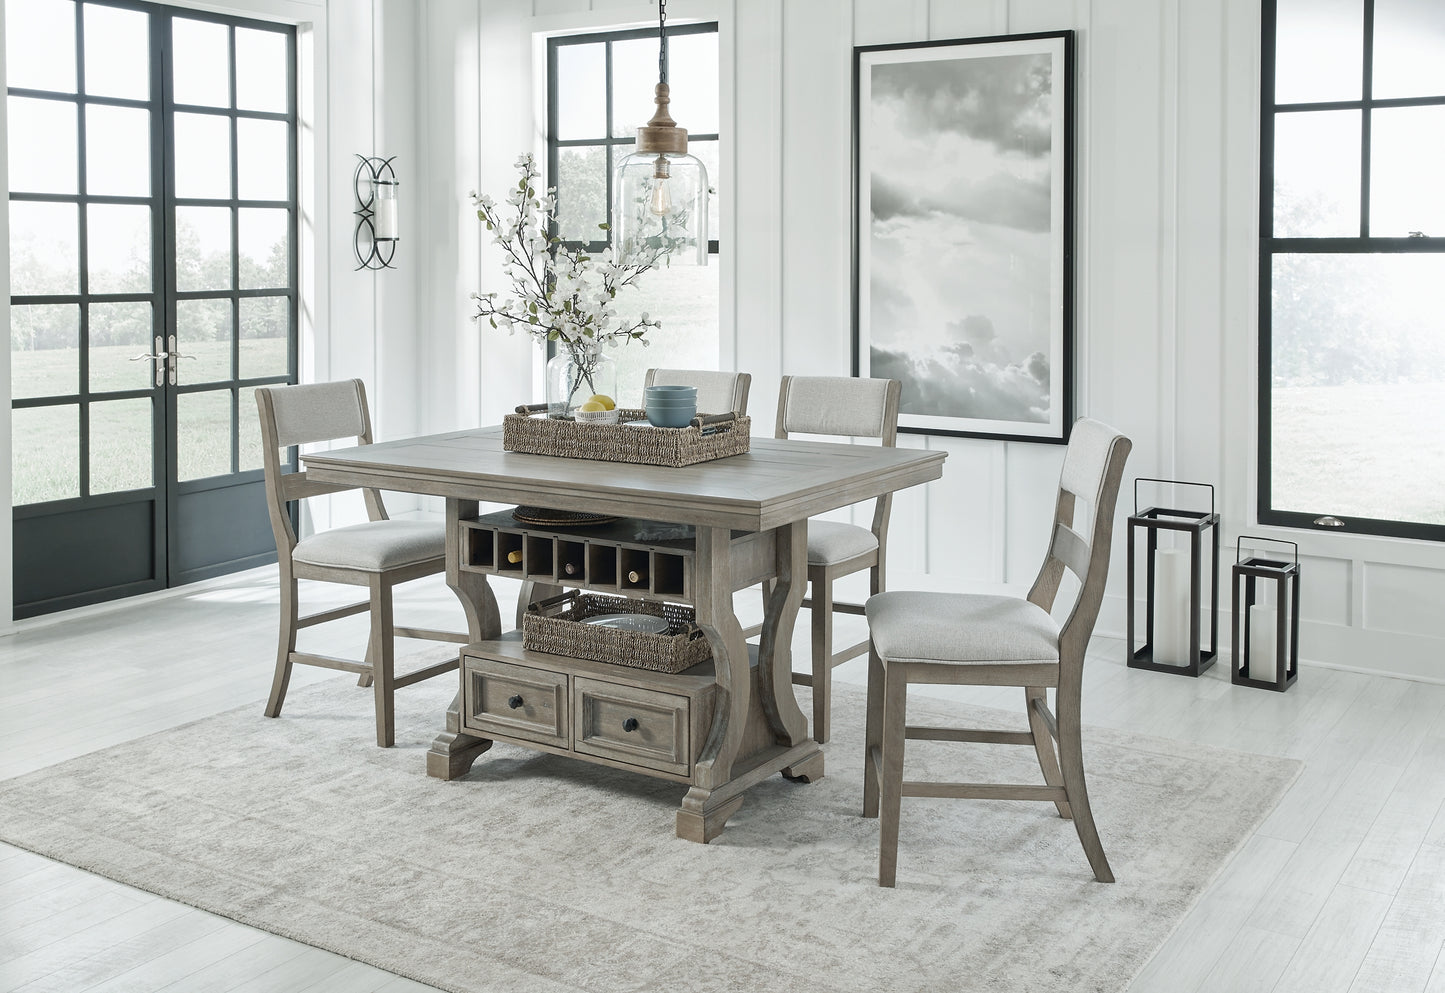 Moreshire Counter Height Dining Table and 4 Barstools Signature Design by Ashley®